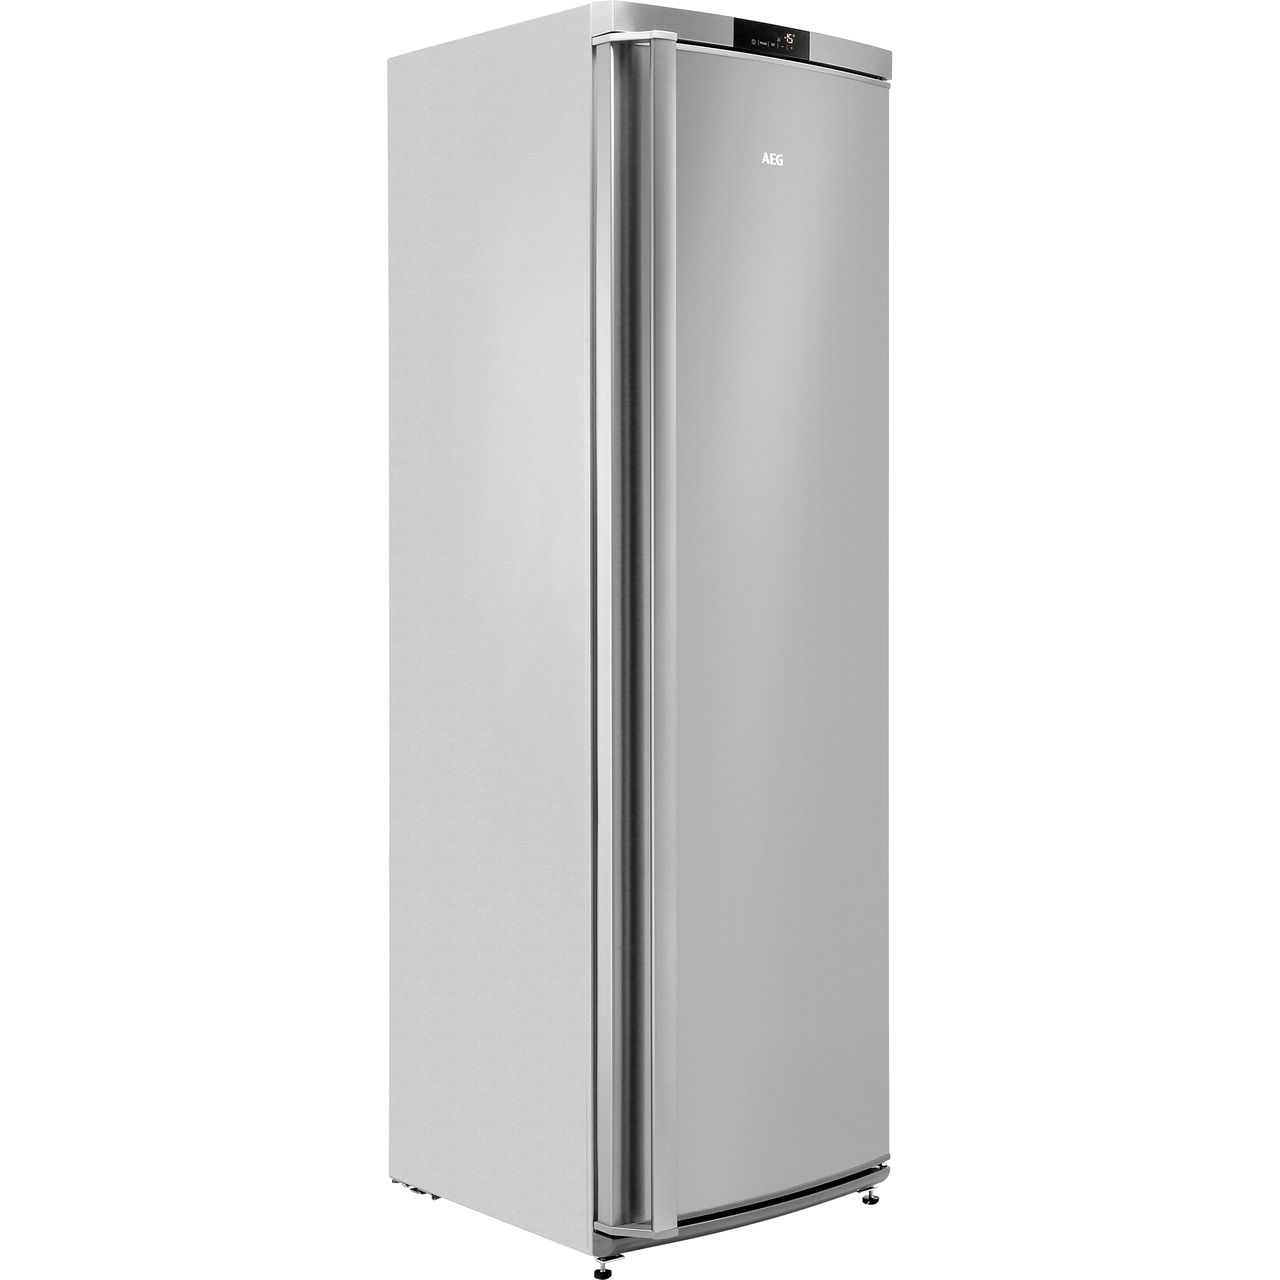 AEG AGE62526NX Frost Free Upright Freezer Review